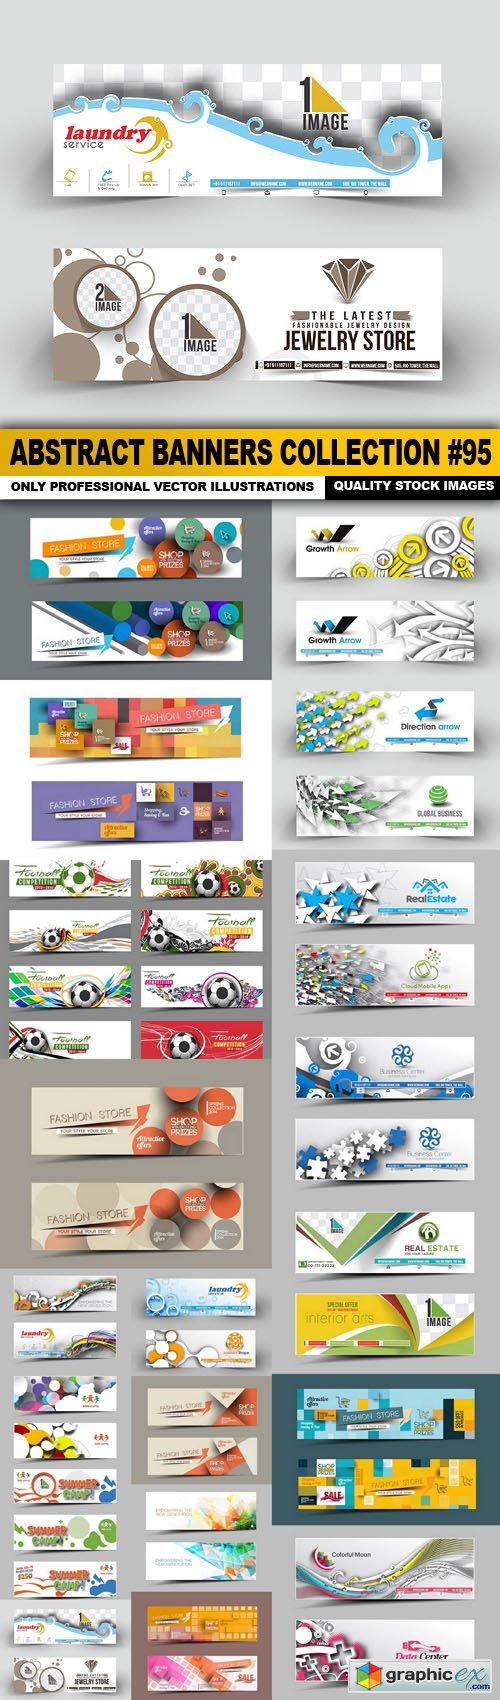 Abstract Banners Collection #95 - 20 Vectors